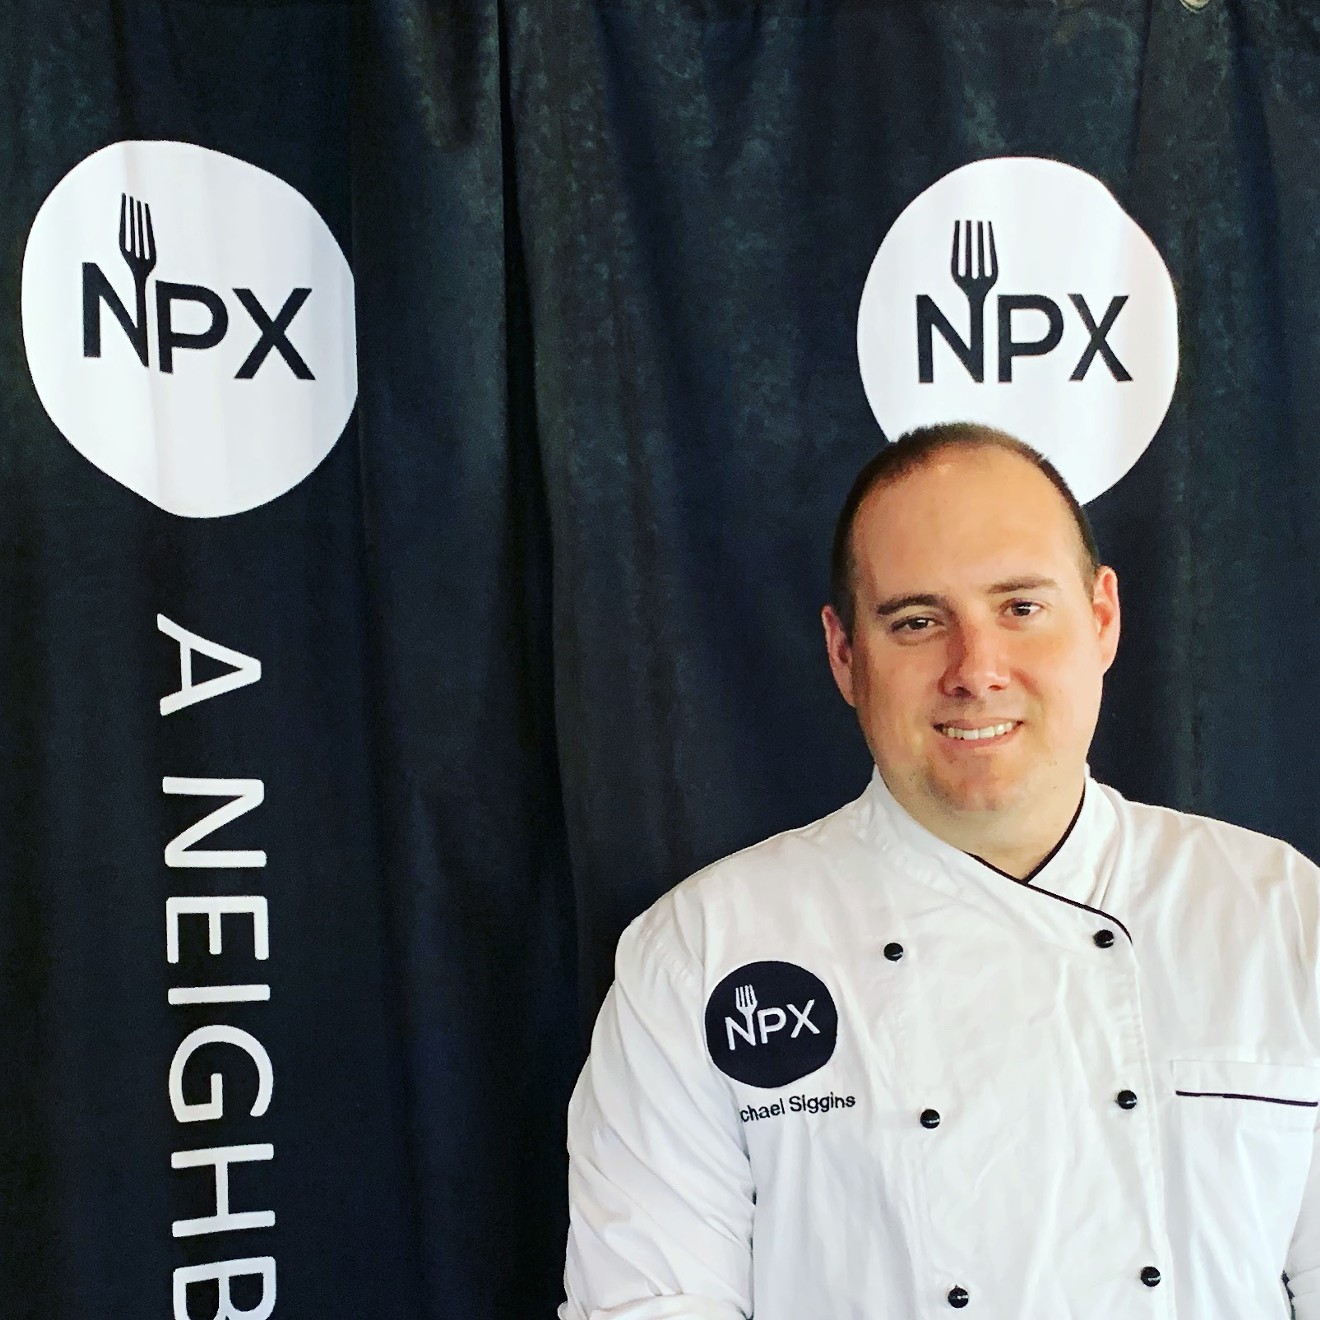 Michael Siggins transitioned from an accountant to the owner and chef of NPX: A Neighborhood Joint.